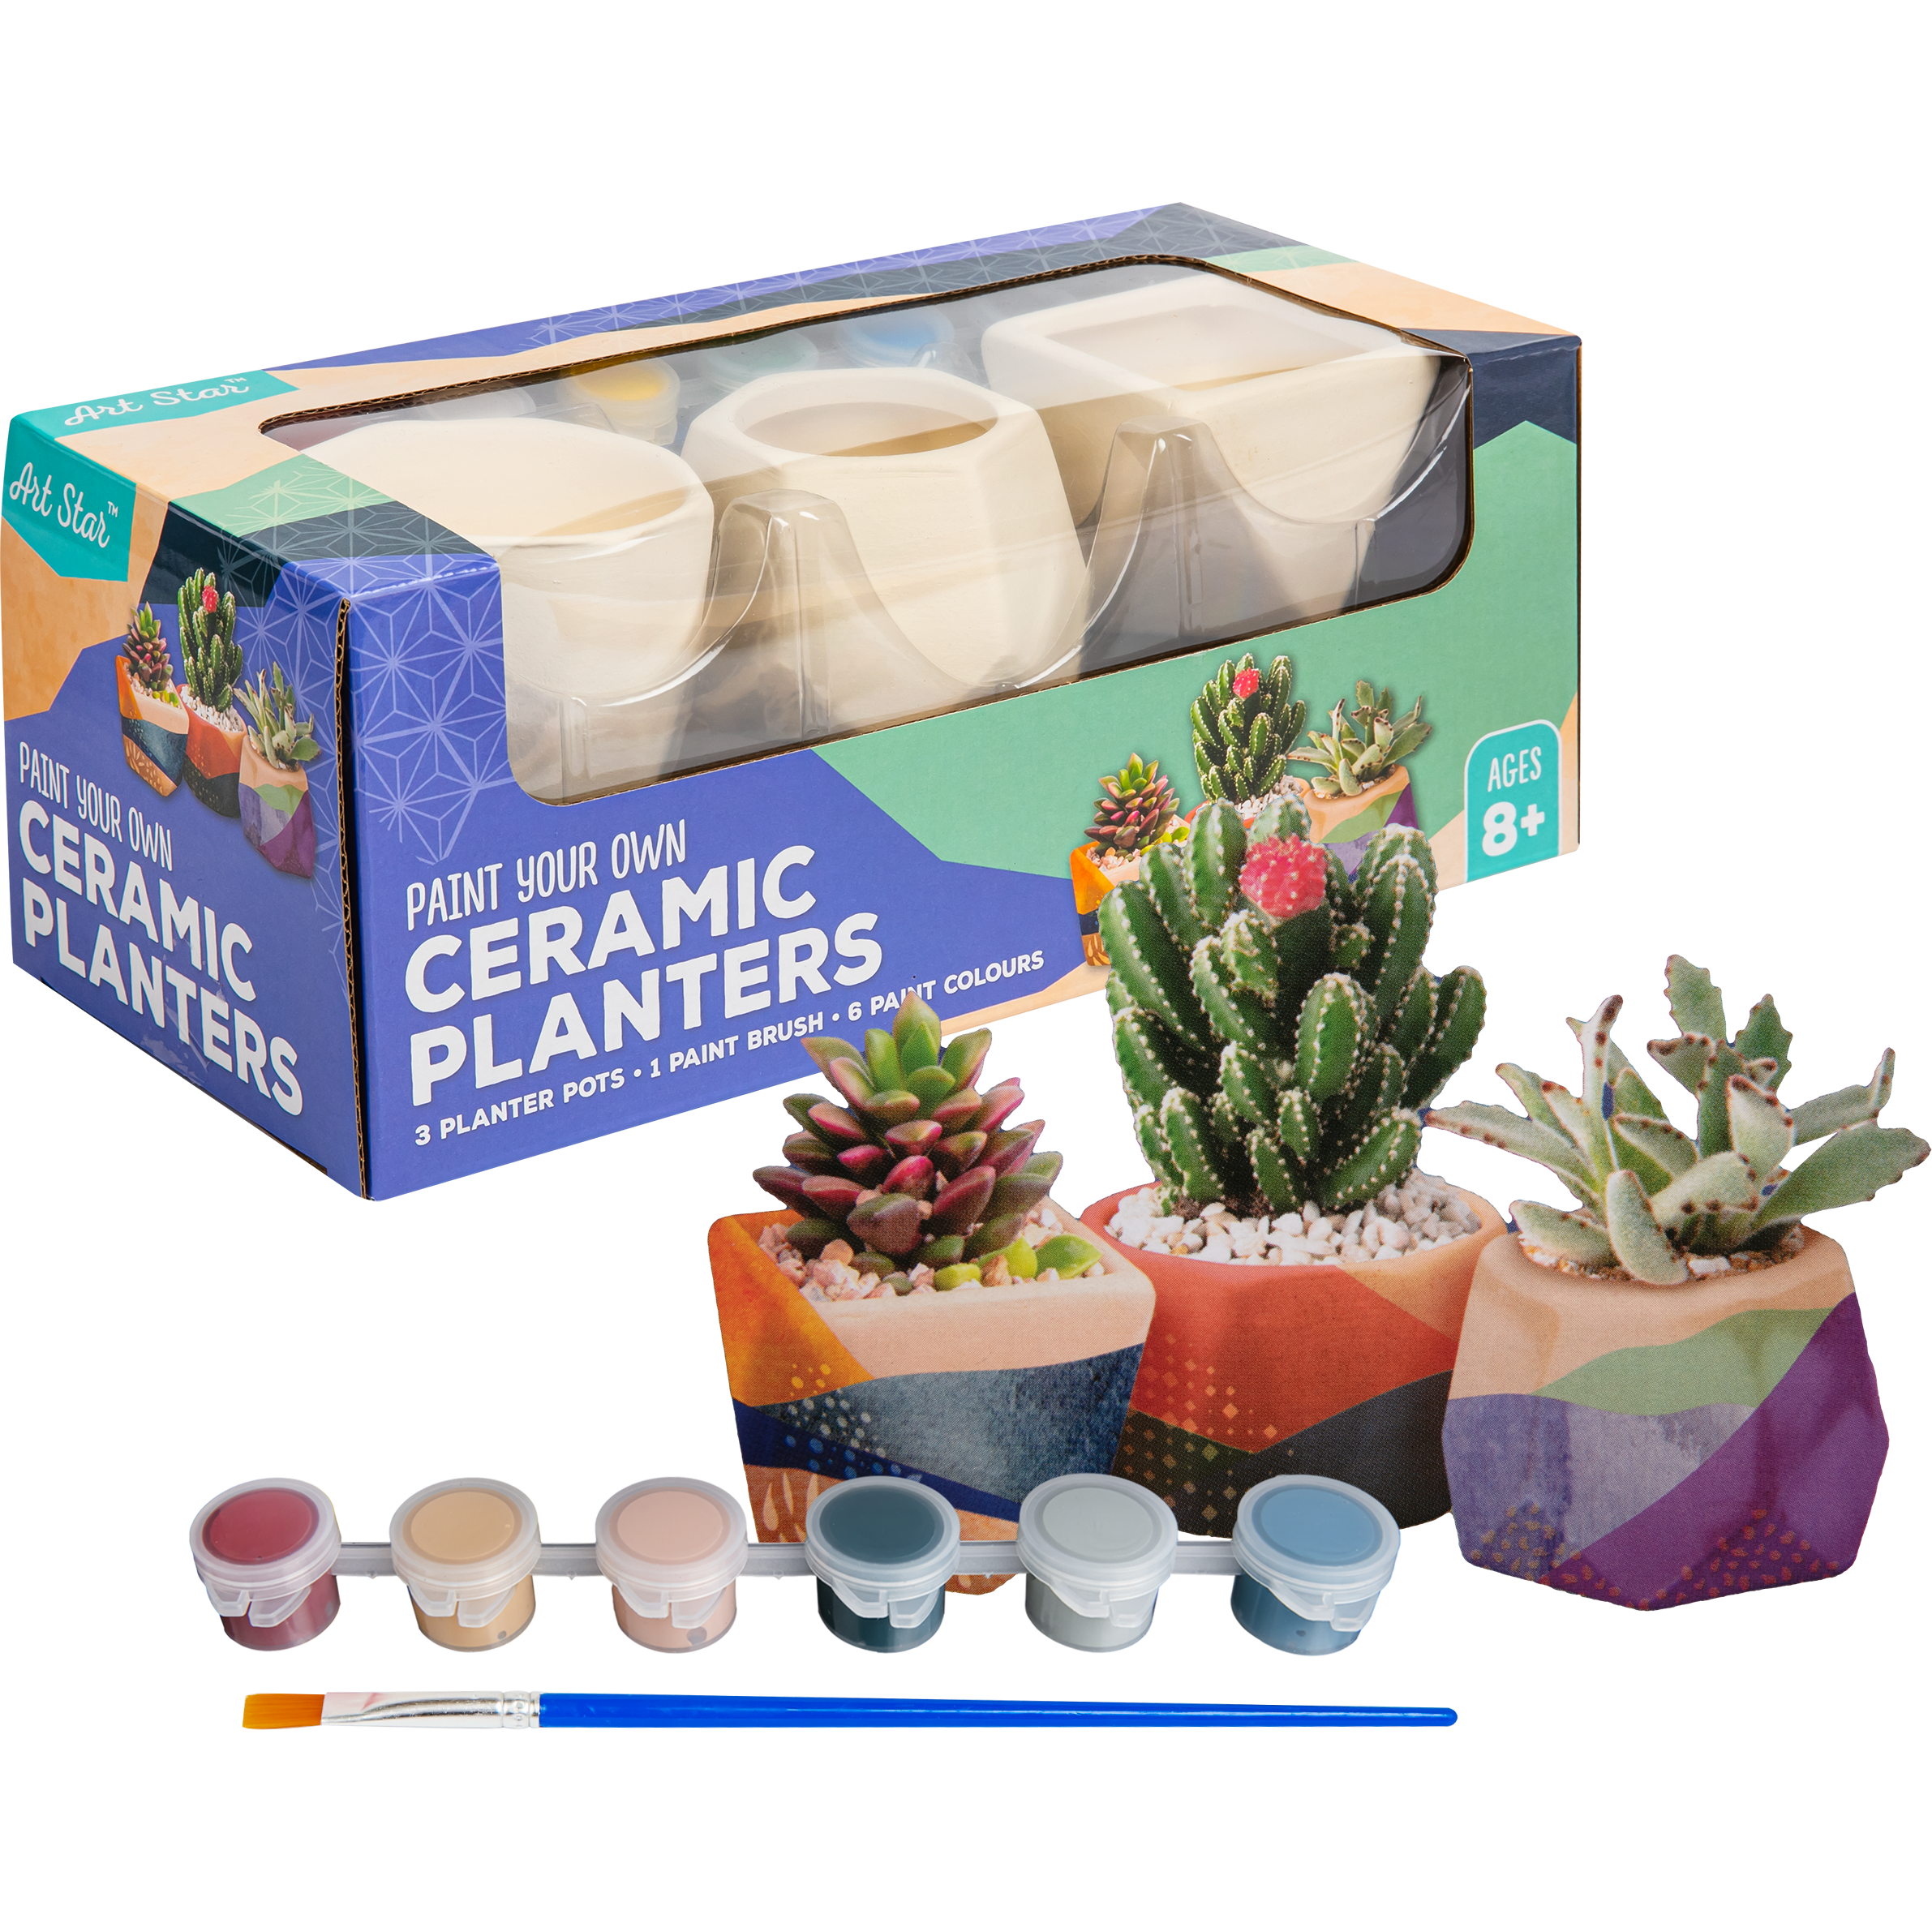 https://www.shopriot.shop/wp-content/uploads/1689/98/get-the-latest-information-on-art-star-paint-your-own-ceramic-planters-kit-899_0.png